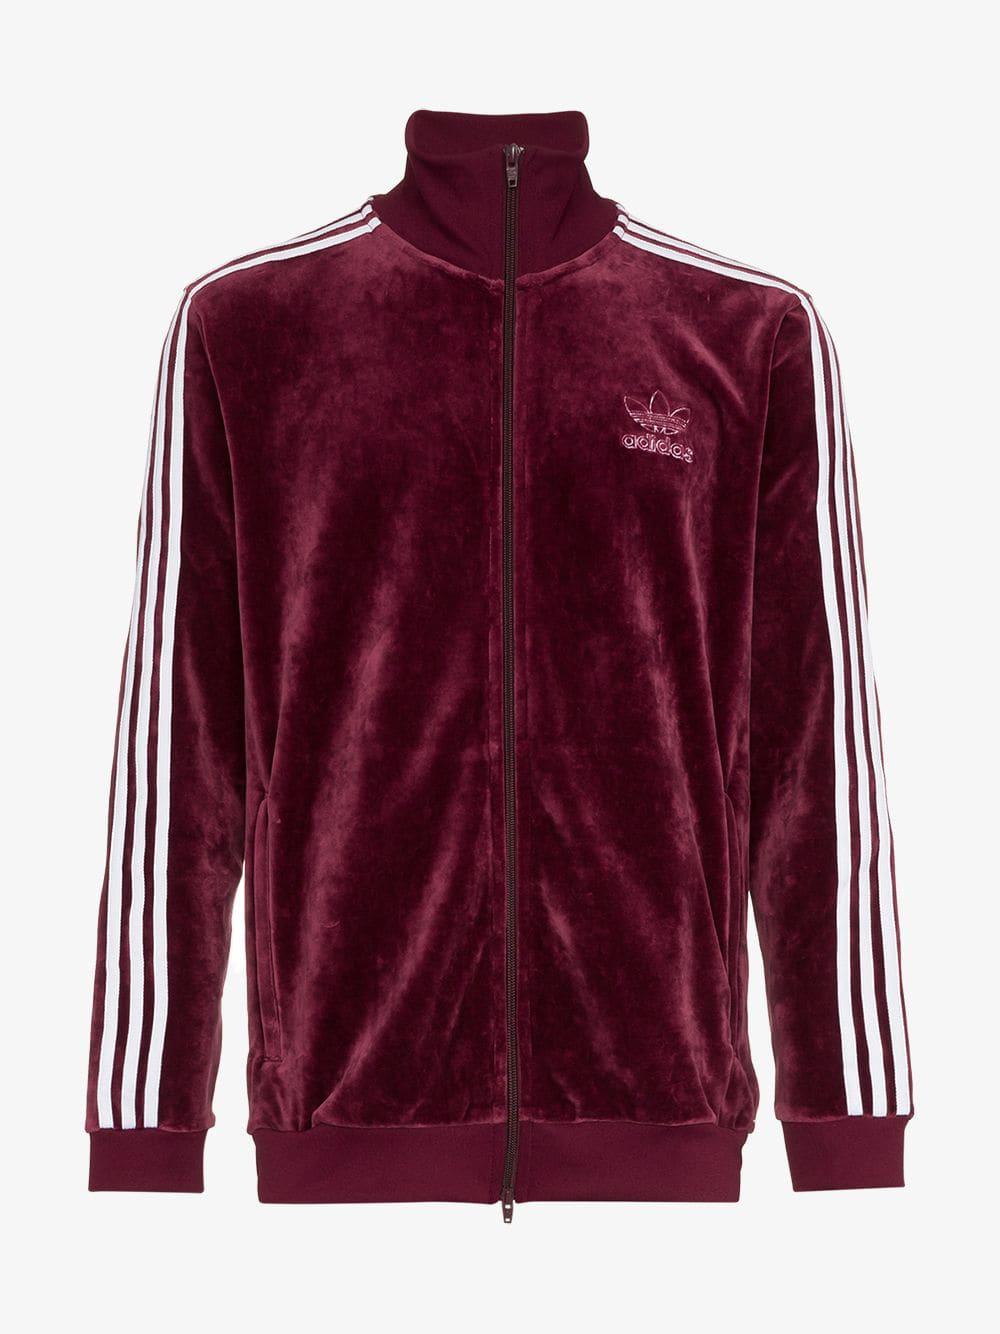 adidas Synthetic Bb Velour Track Jacket in Burgundy (Purple) for Men - Lyst